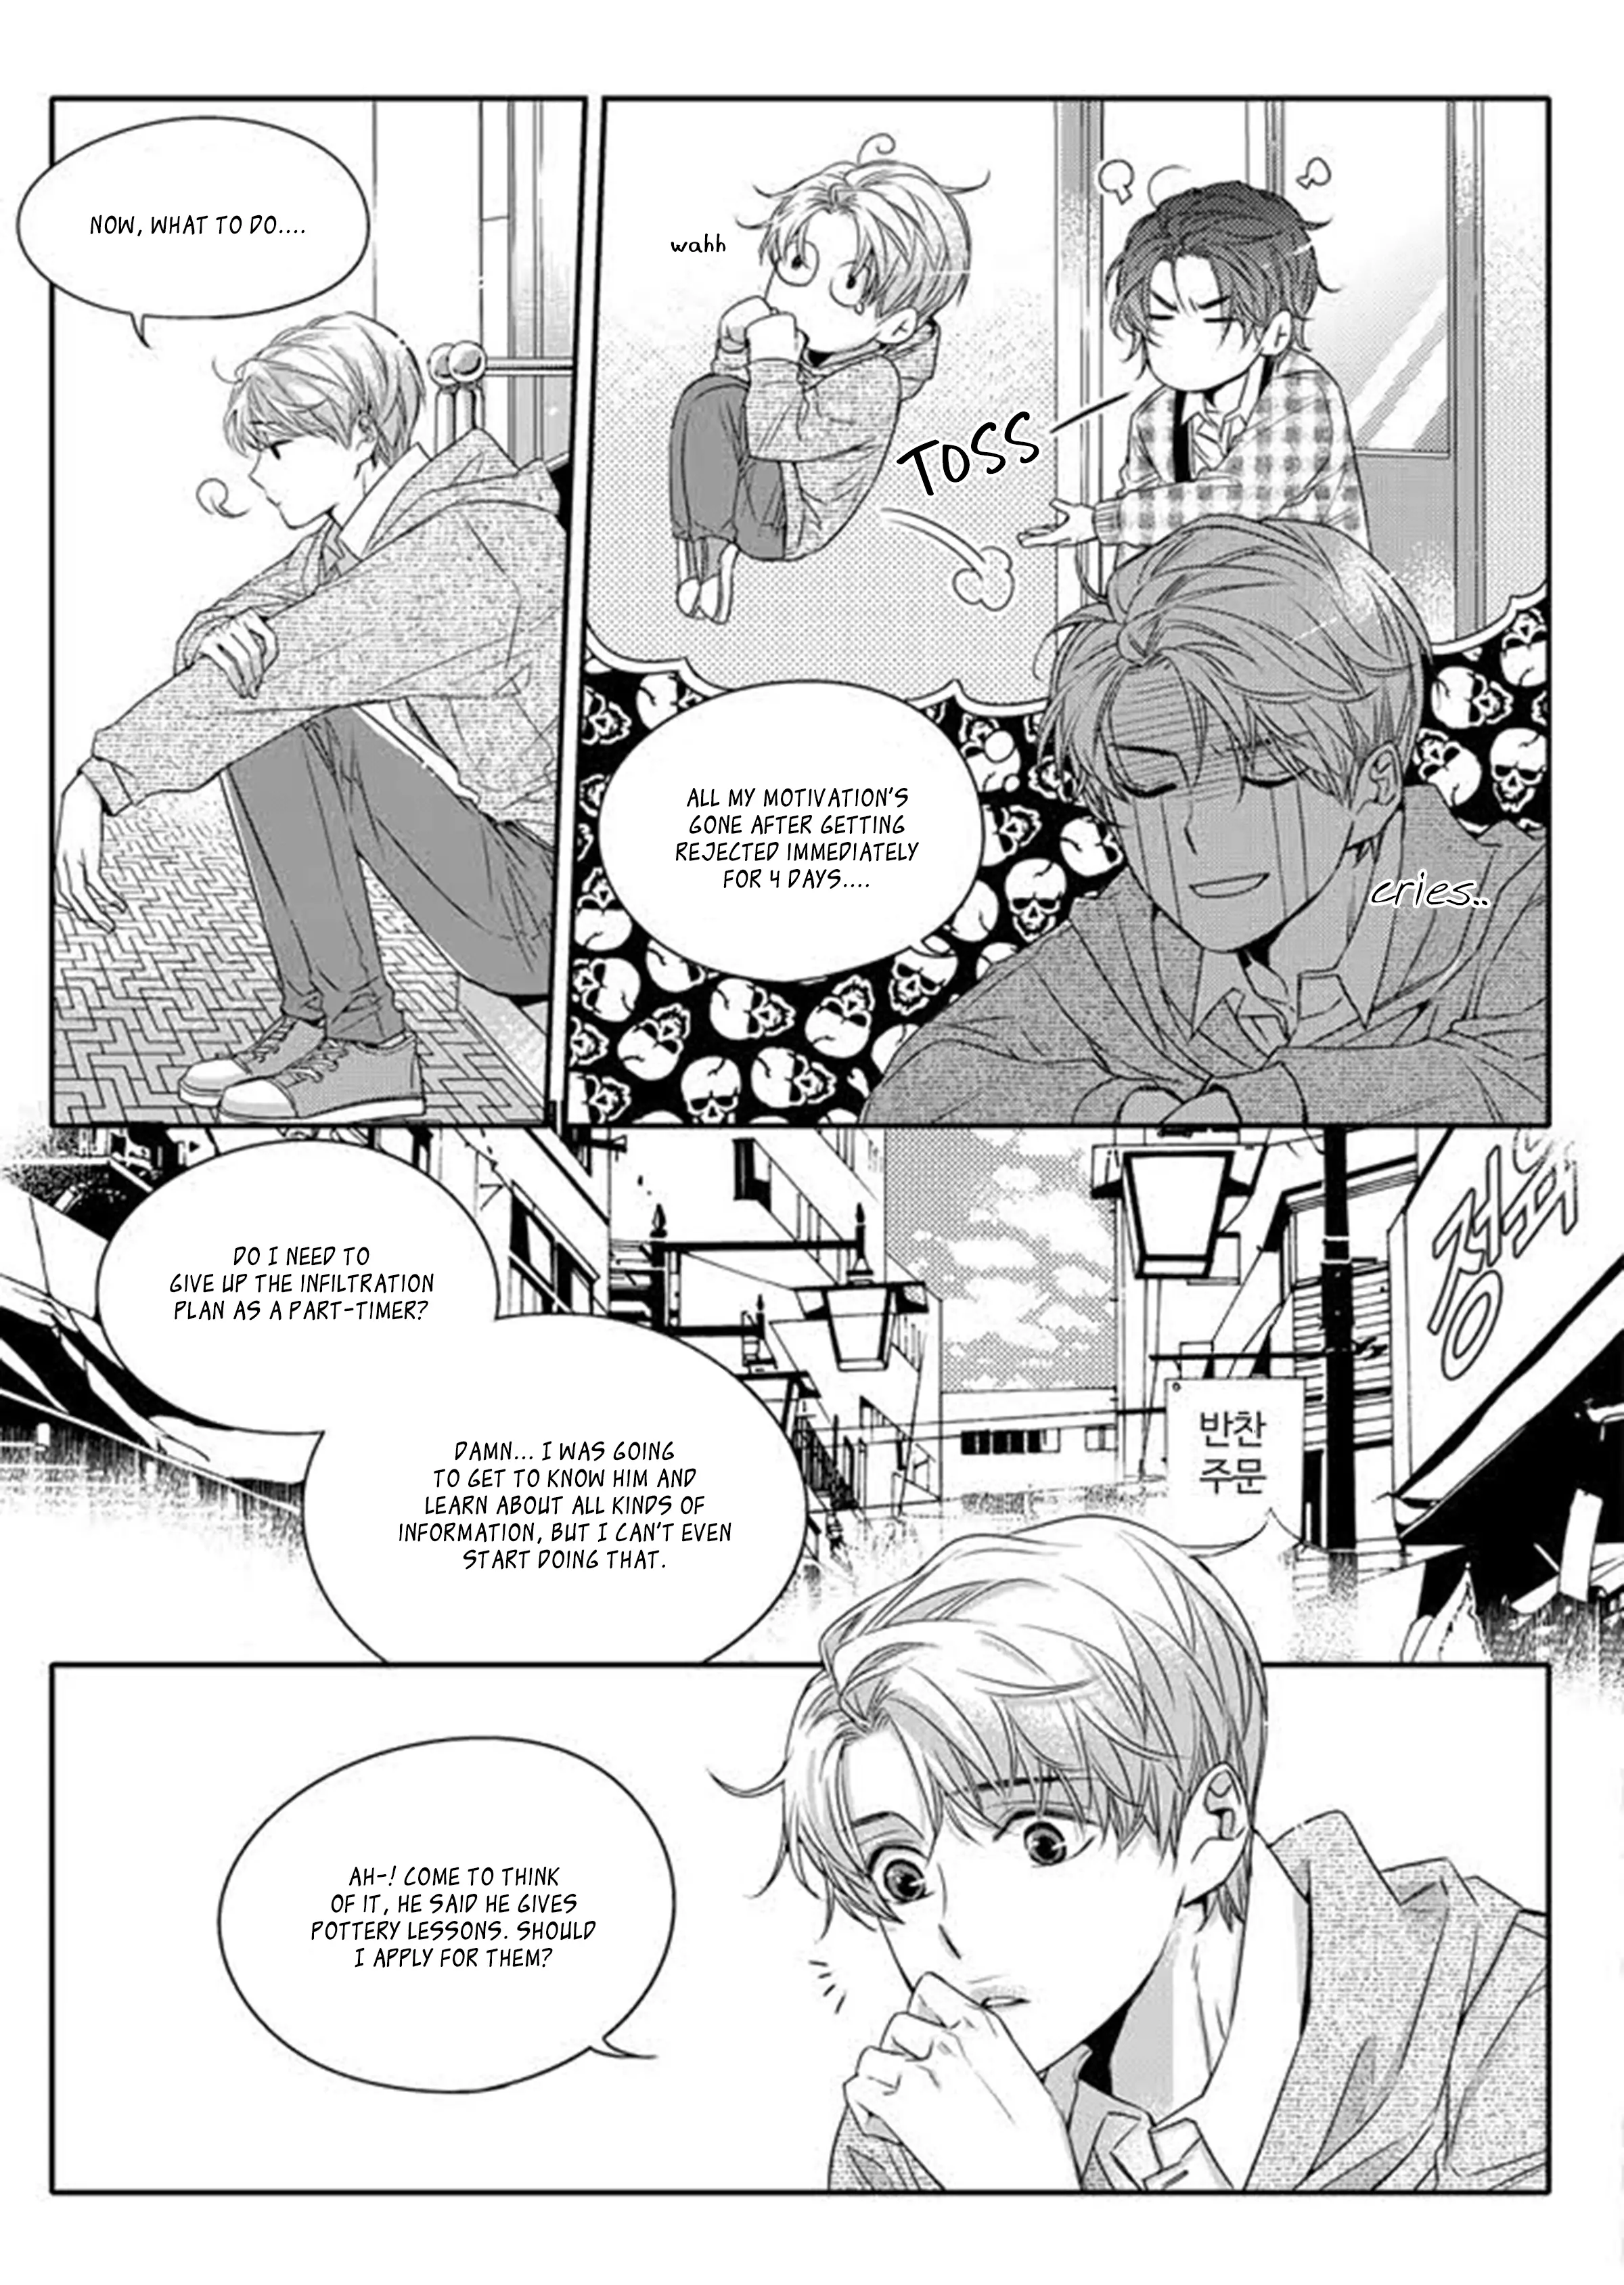 Unintentional Love Story - 3 page 4